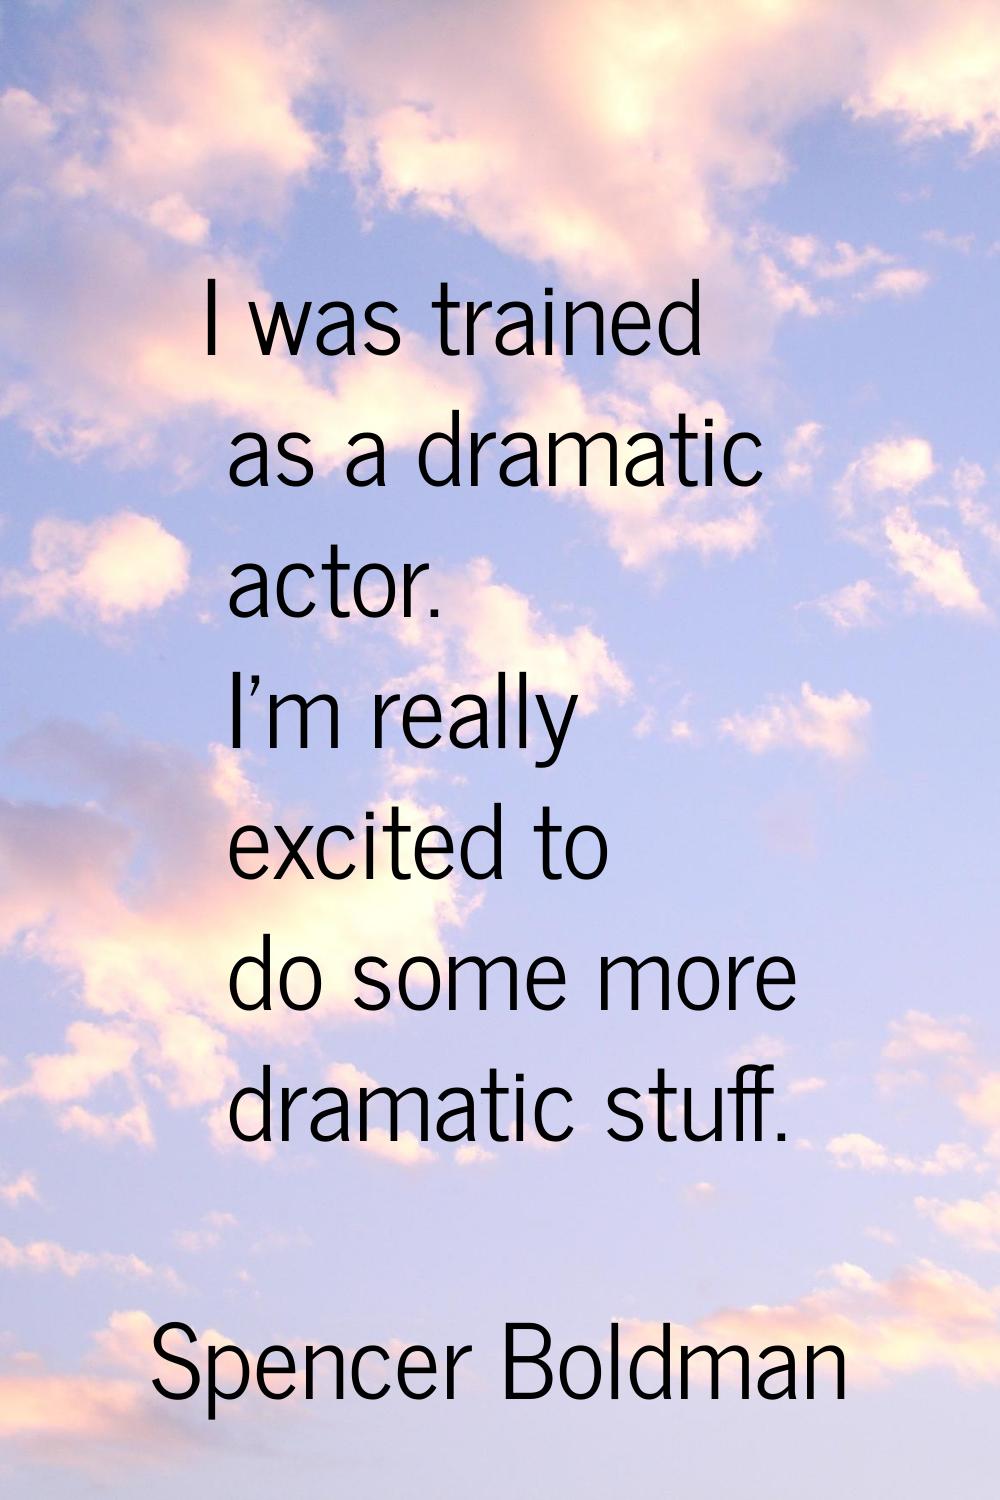 I was trained as a dramatic actor. I'm really excited to do some more dramatic stuff.